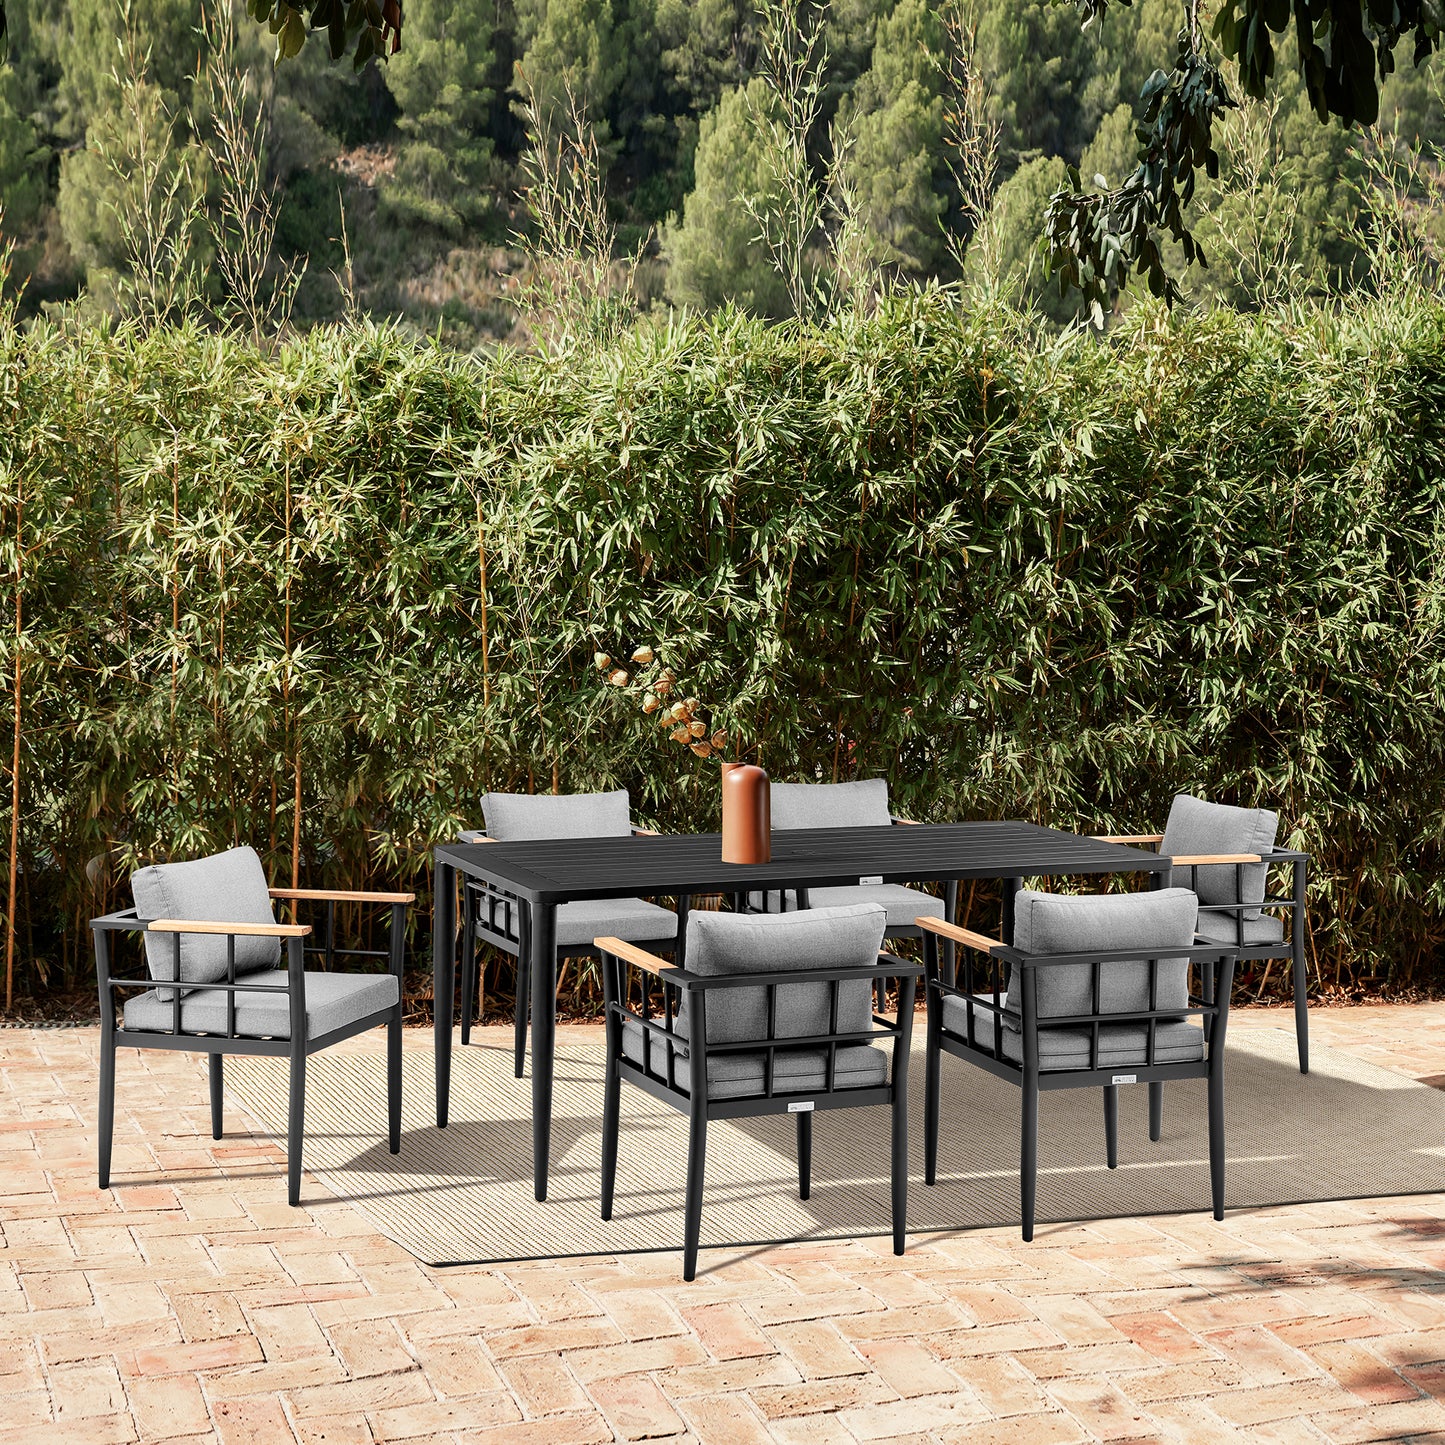 Beowulf Outdoor Patio 7-Piece Dining Table Set in Aluminum and Teak with Gray Cushions